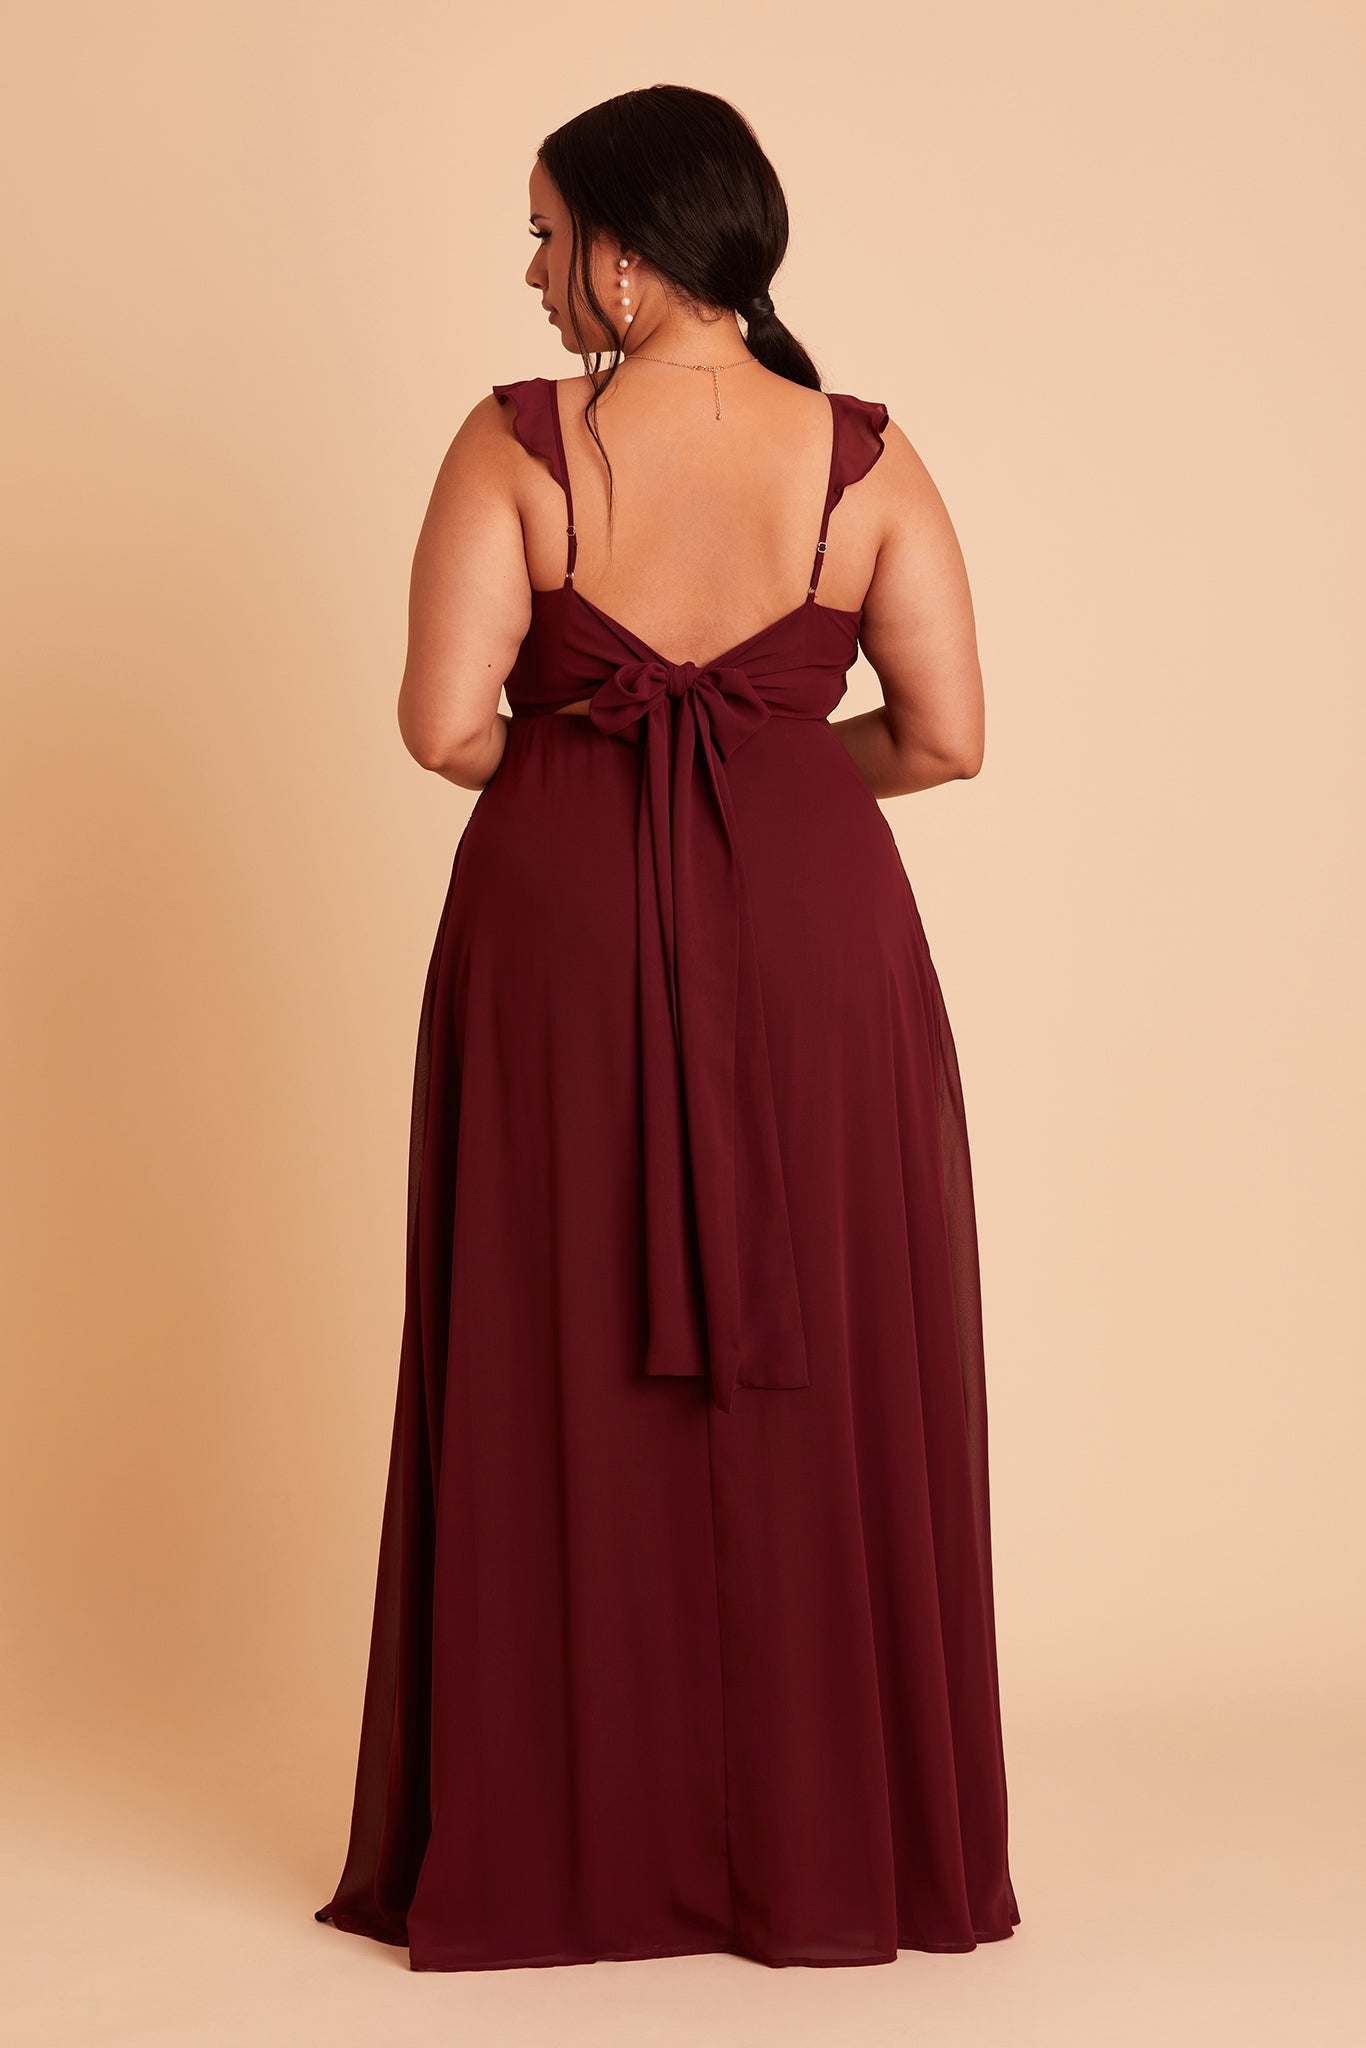 Red Bridesmaid Dresses | Wine, Burgundy & More Red Shades | Windsor